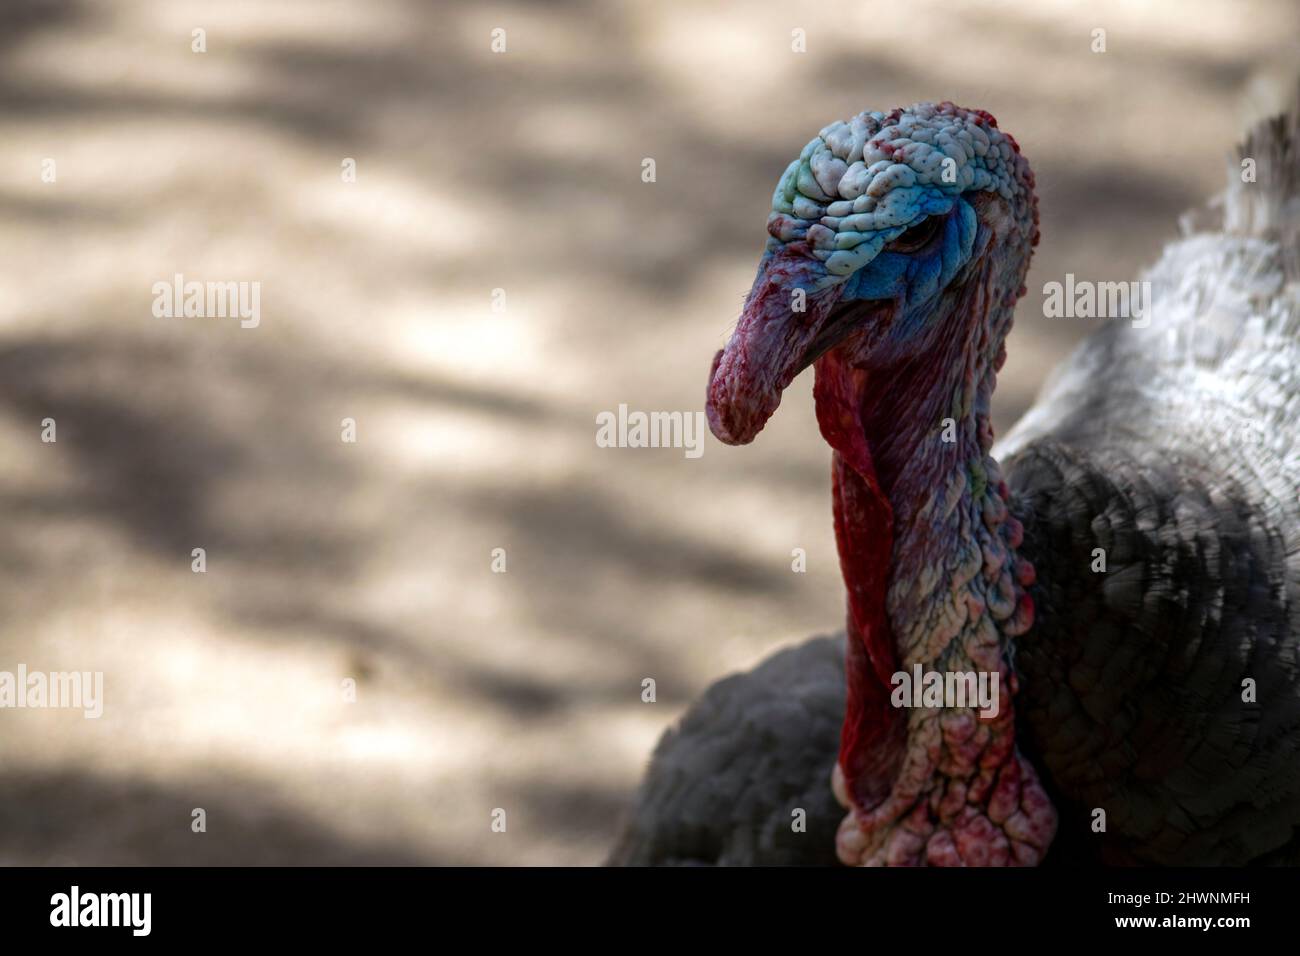 The wild turkey (Meleagris gallopavo) is an upland ground bird native to North America, one of two extant species of turkey, and the heaviest member. Stock Photo